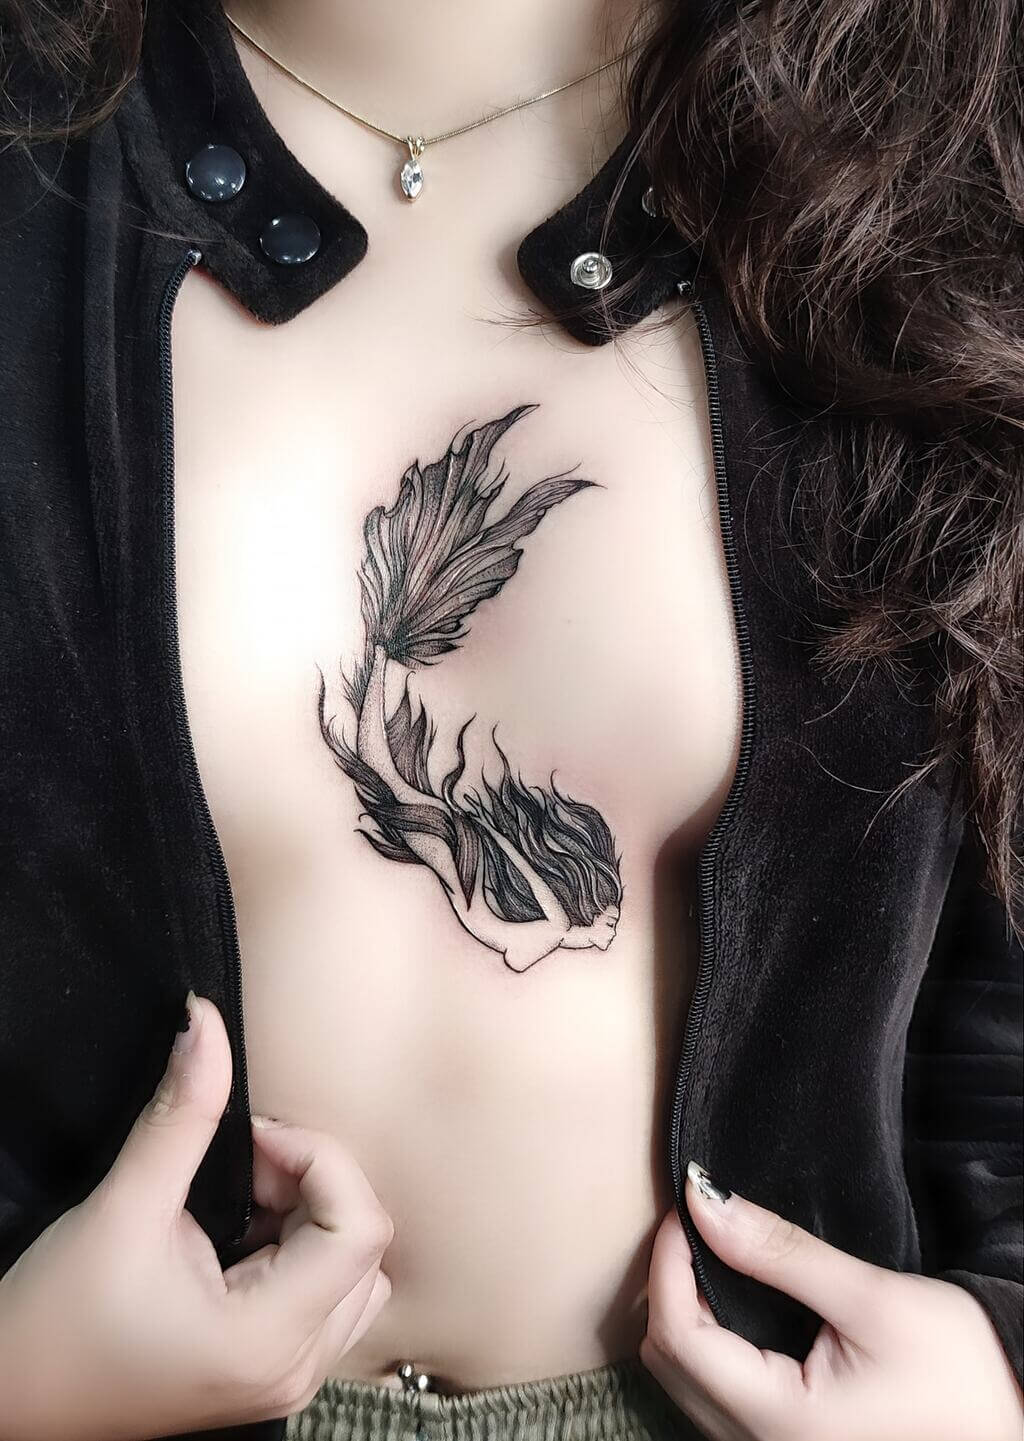 Looking for Breast Tattoo Ideas Check out these 7 designs